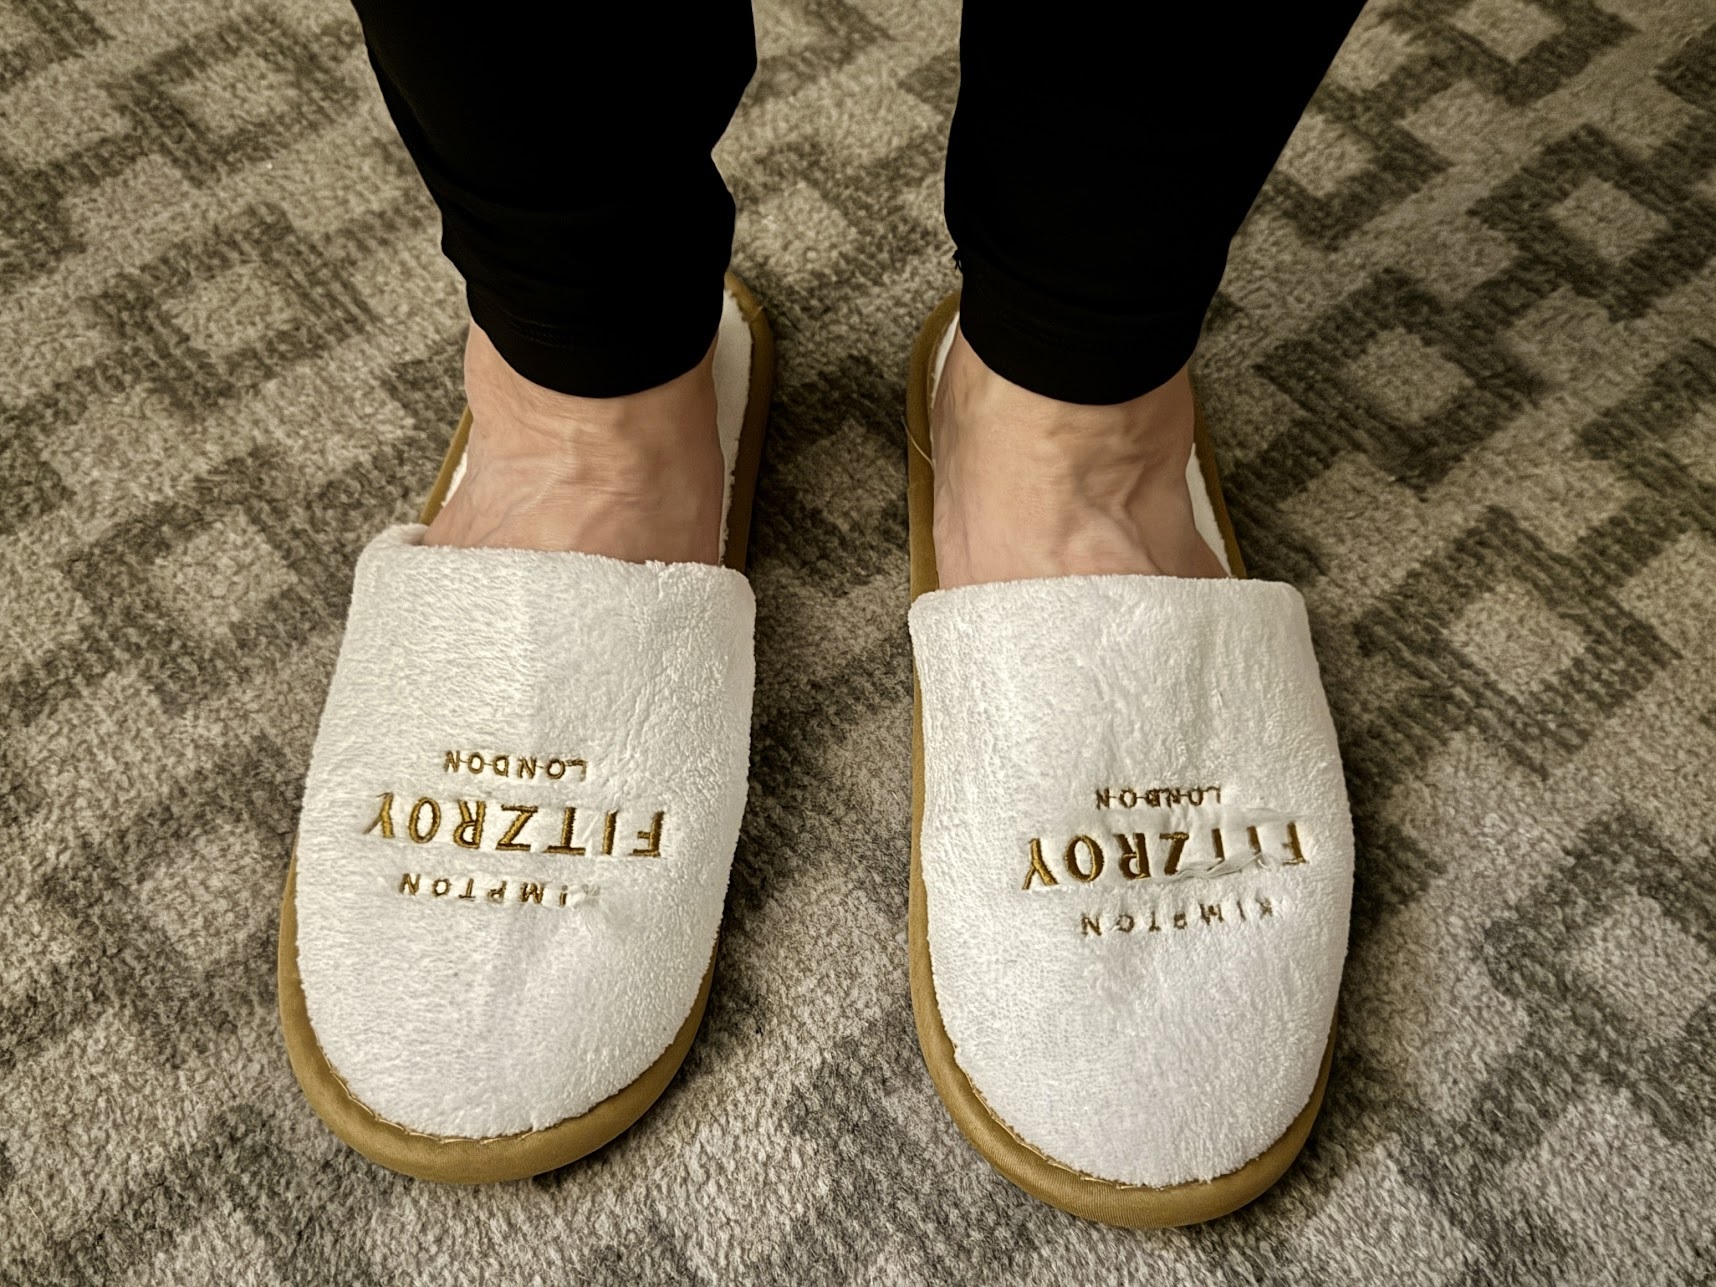 a person wearing slippers on a carpet